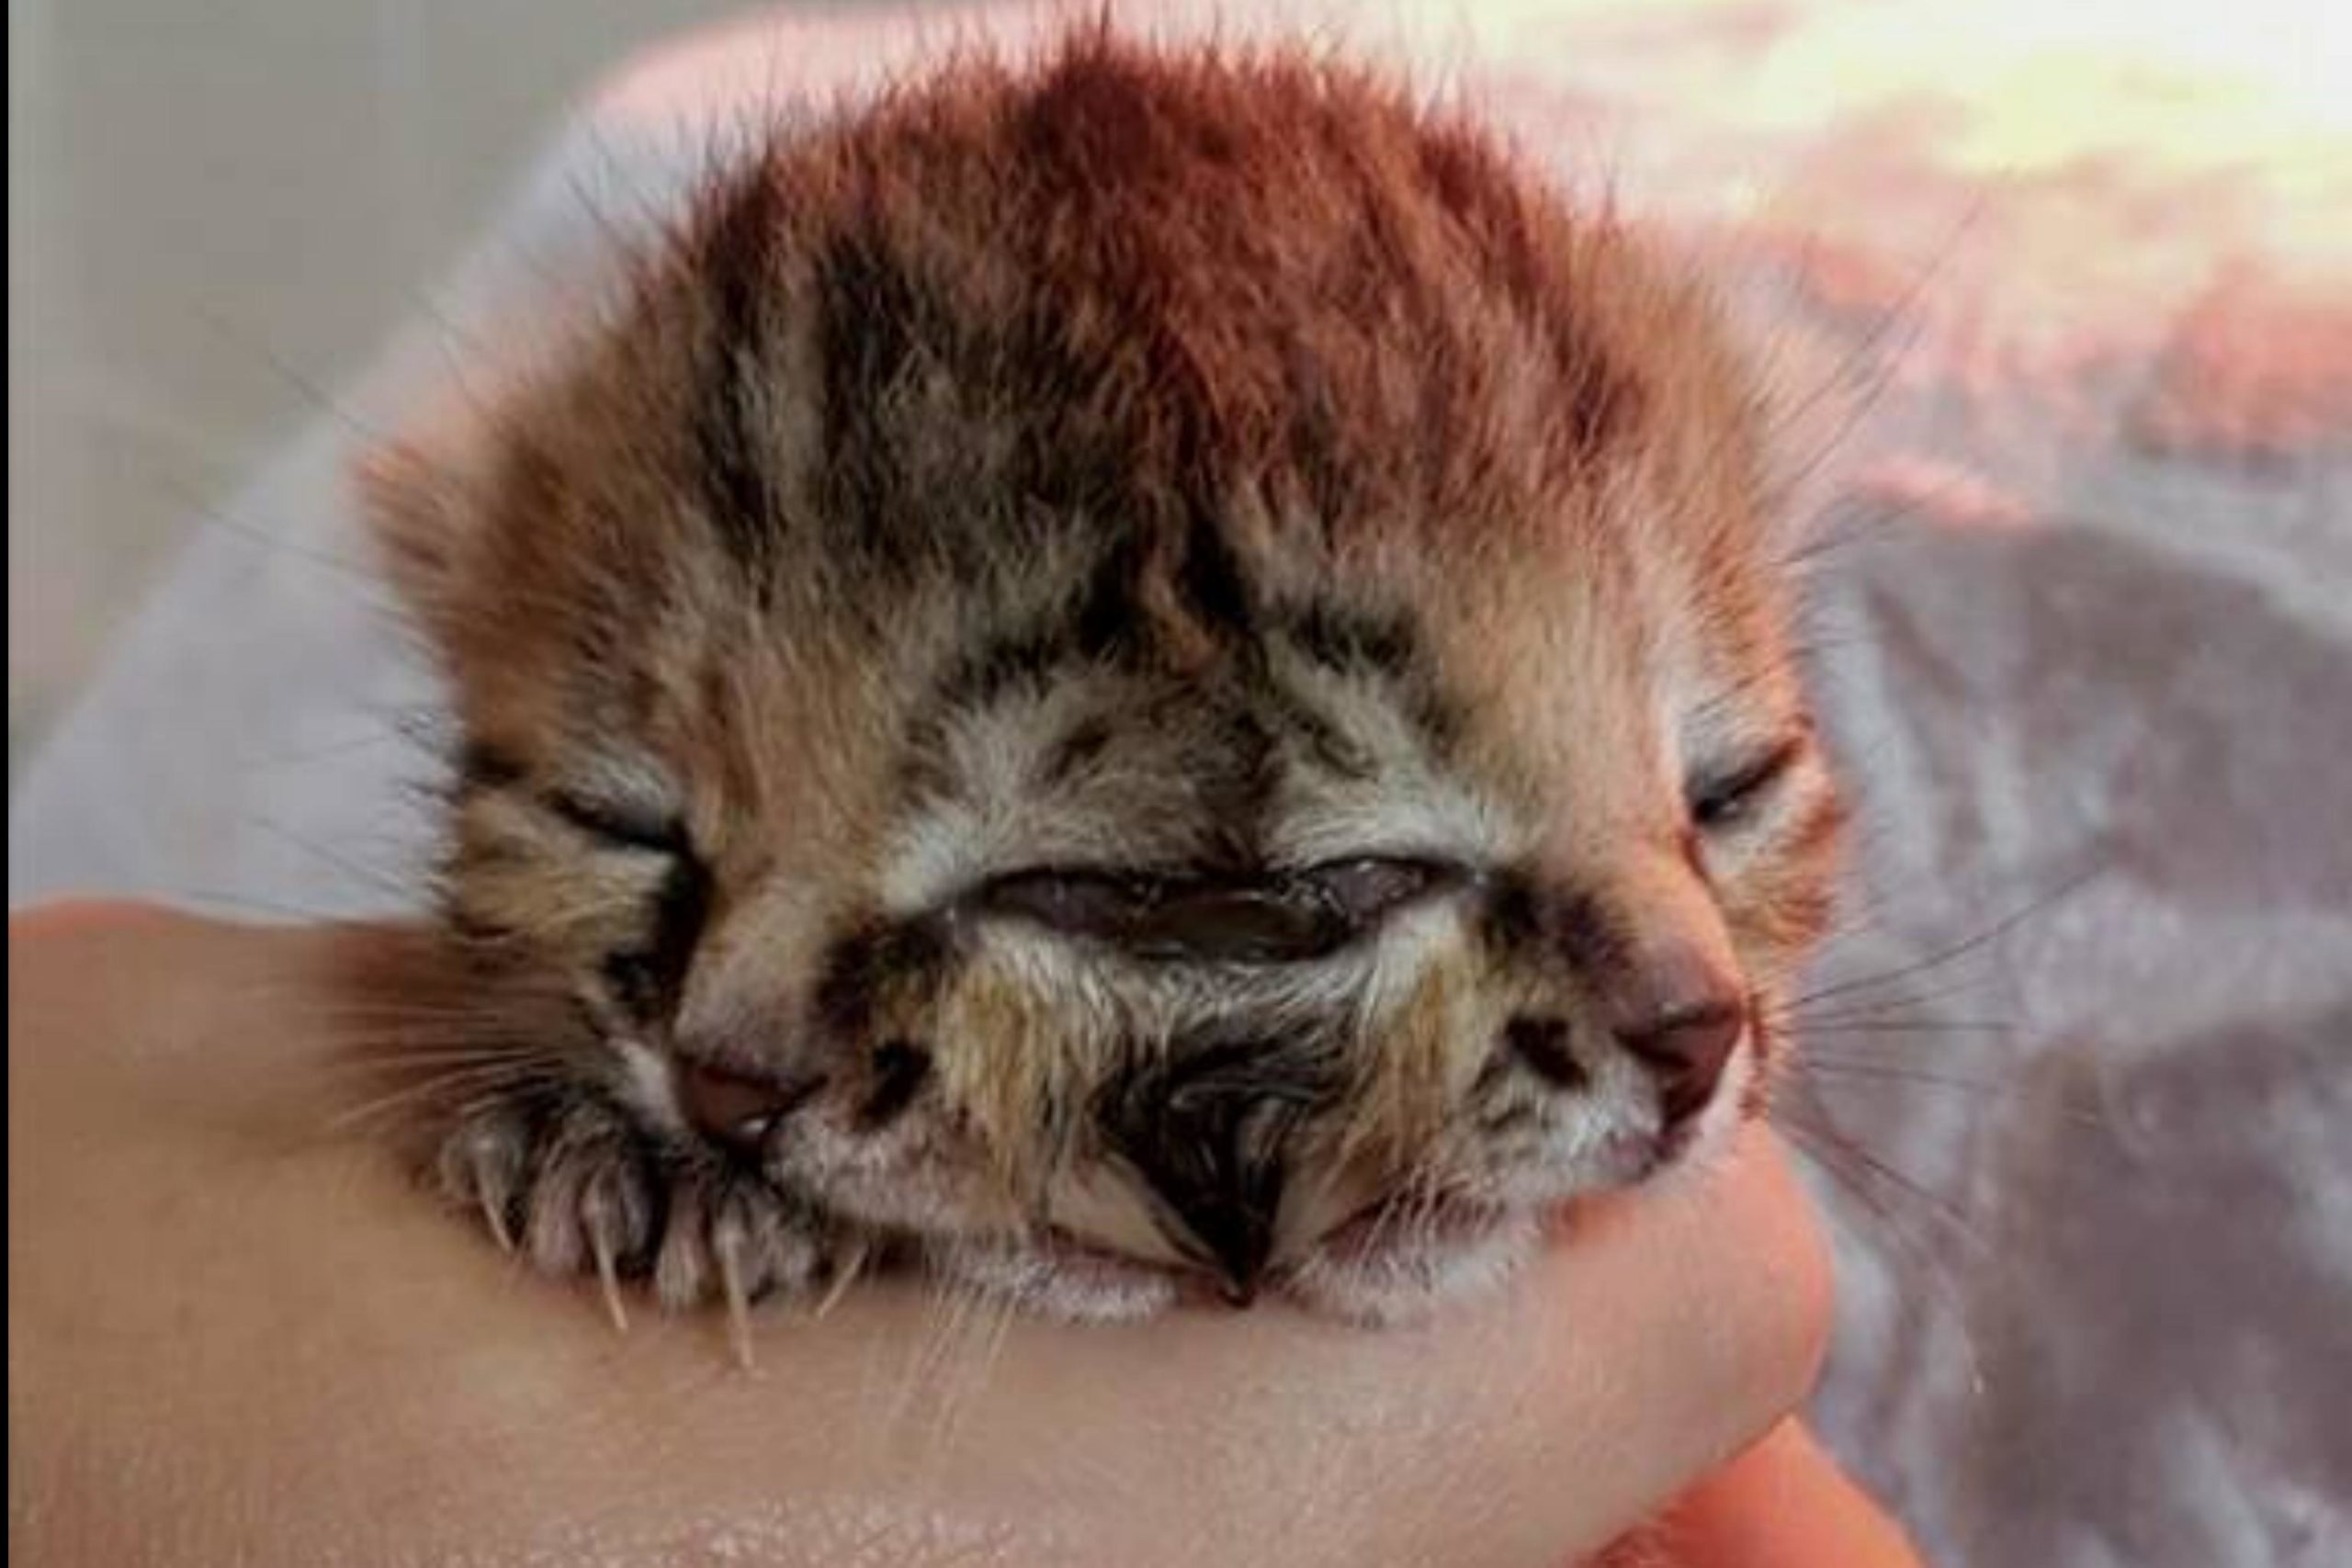 Two-faced kitten Biscuits and Gravy dies only 4 days after birth